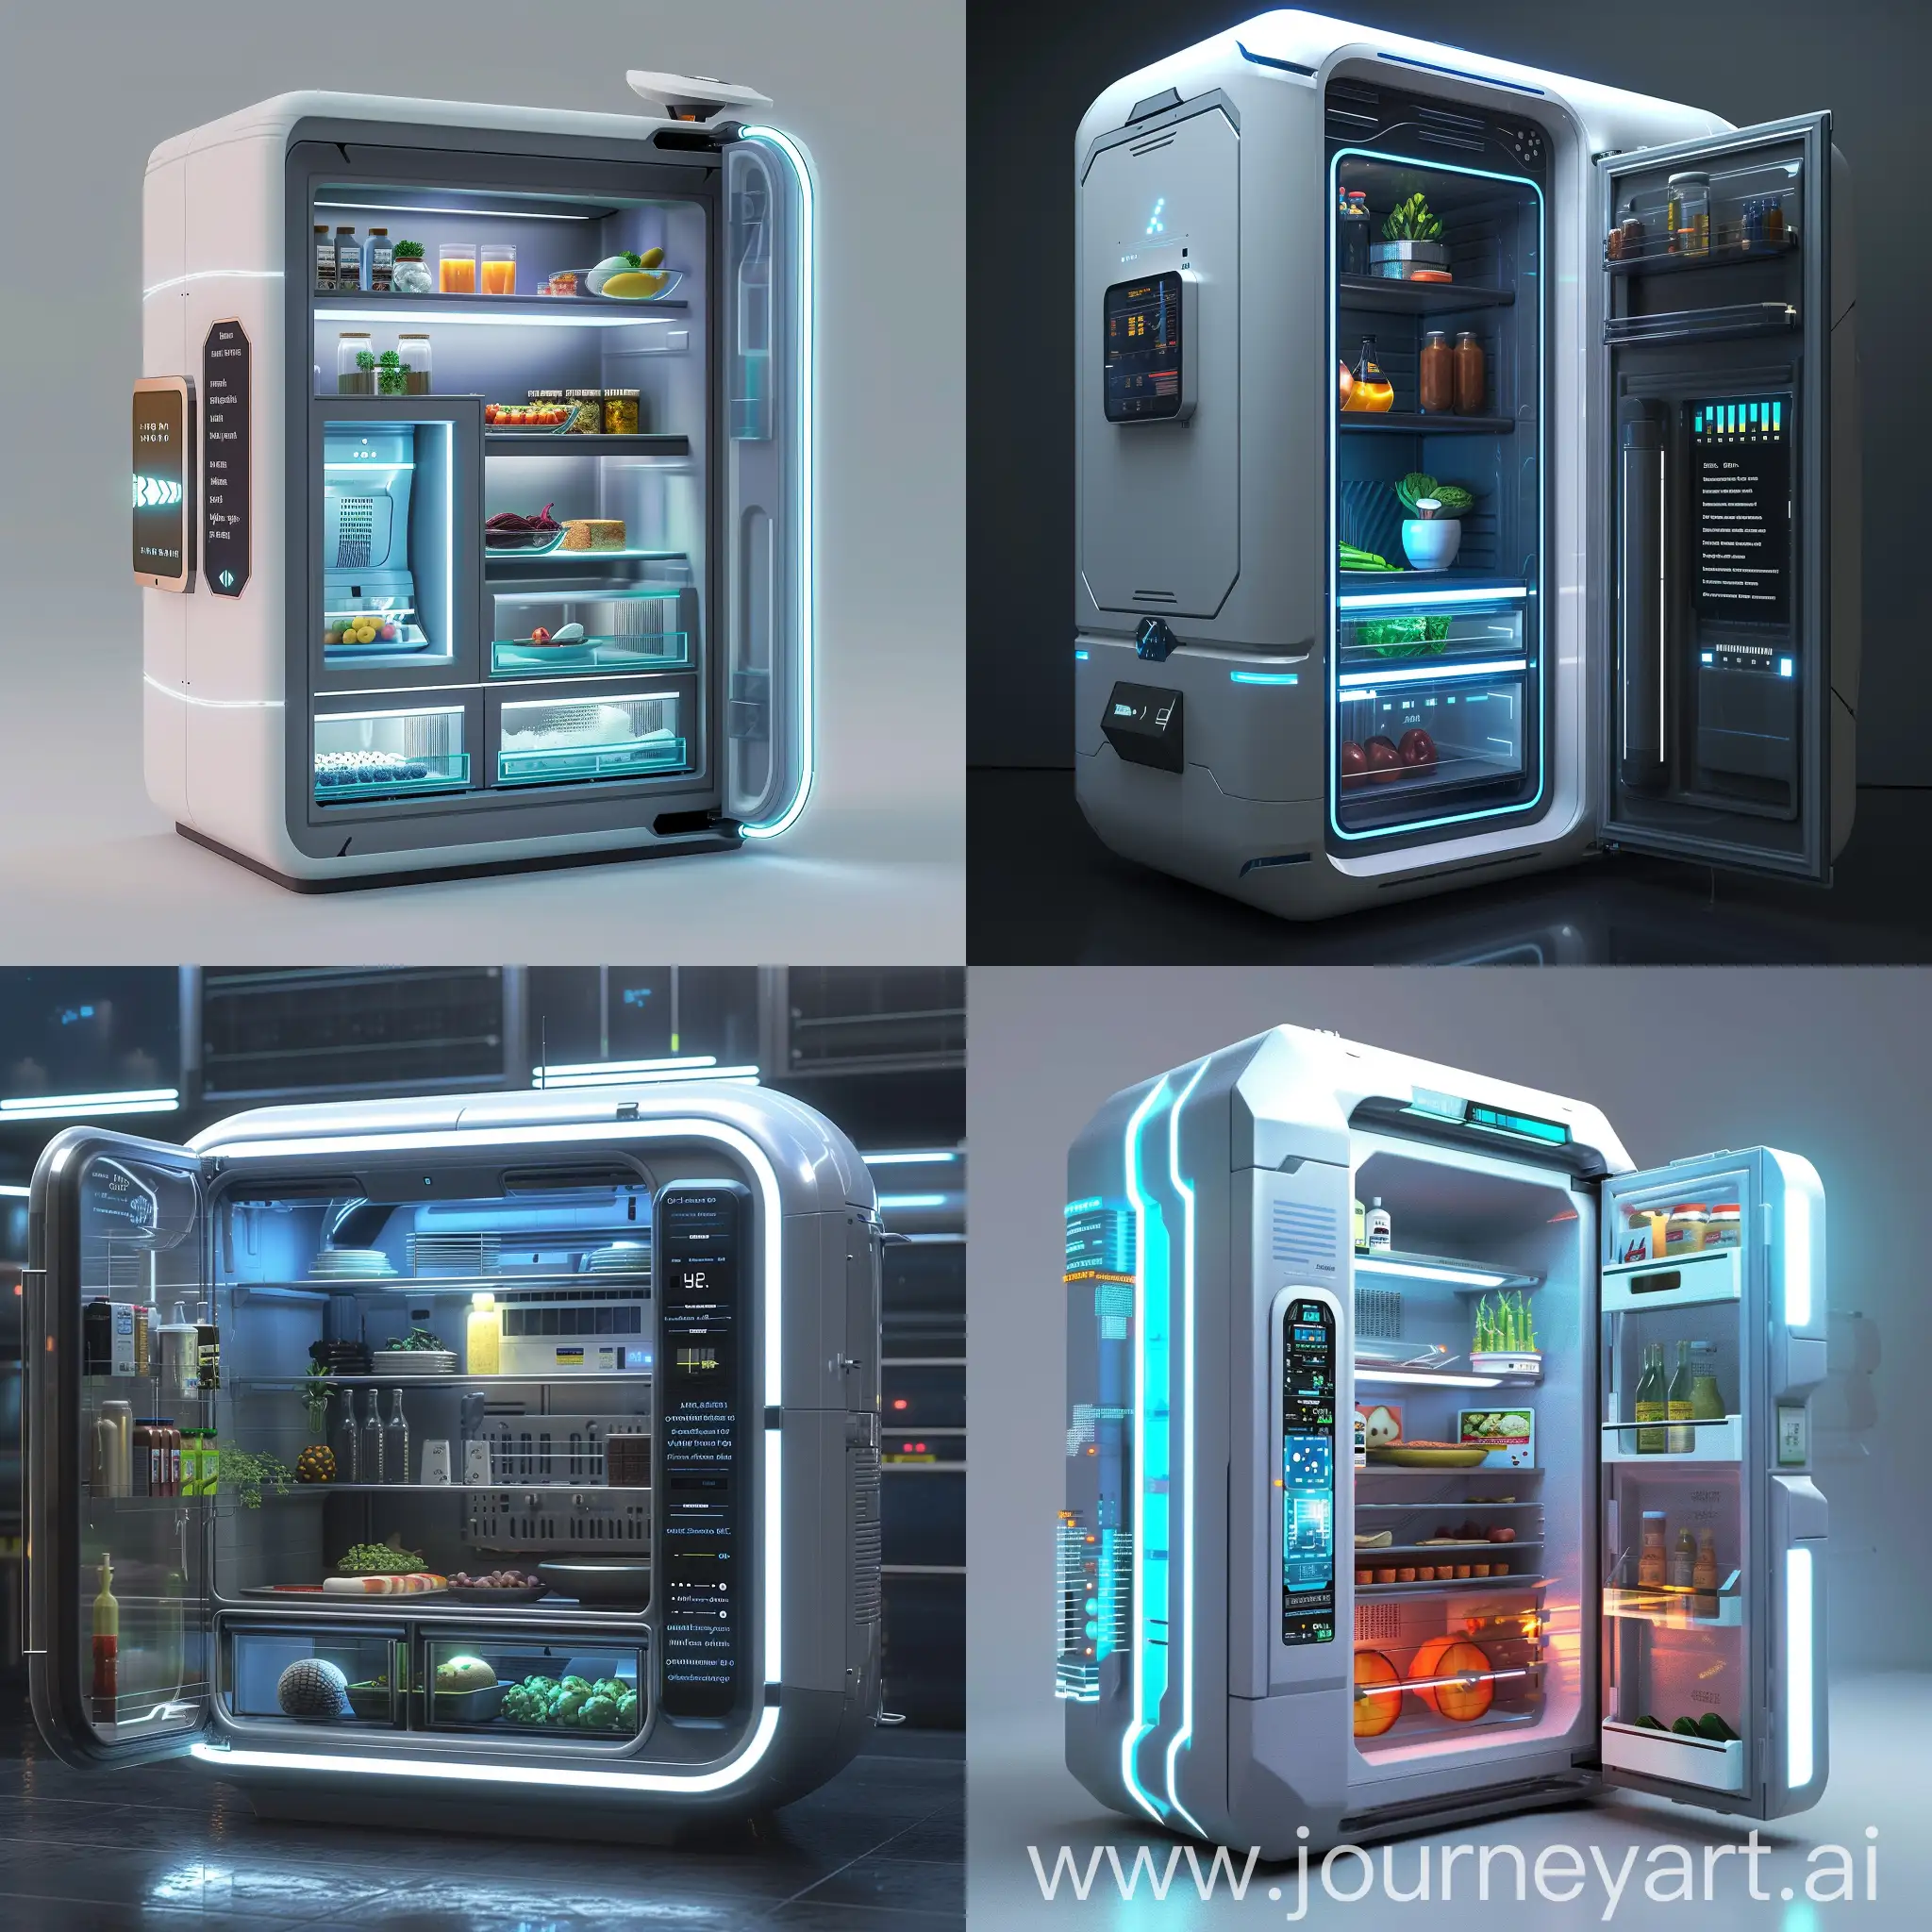 High-tech futuristic fridge, Multi-Zone Climate Control, Transparent OLED Touchscreen Panels, Advanced Compressor Technology, UV-C Sterilization, Smart Inventory Management, Automated Shelf Adjustment, AI-Powered Food Recognition, Modular Design, Energy Harvesting, Vacuum Insulation Panels, Nano-Refrigerants, Self-Cleaning Surfaces, Nano-Sensors, Thermo-Electric Cooling Elements, Nano-Filtered Air Circulation, Quantum Dot Displays, Nanocomposite Materials, Magnetic Refrigeration, Nano-Encapsulated Phase Change Materials (PCMs), Graphene-Based Cooling Systems, Smart Glass Panels, Solar Panel Integration, Interactive Display Interface, Responsive LED Lighting, Biometric Access Control, Wireless Charging Surfaces, Aerogel Insulation Coating, Ambient Temperature Sensors, Modular Attachment Points, Anti-Microbial Coating, Nano-Paint, Thermal Nanocoatings, Vibration Energy Harvesting, Nanocomposite Exteriors, Nanotech Sealants, Nano-Optimized Hinges, Electrochromic Windows, Nanofiber Air Filters, Graphene-Infused Panels, Nanostructured Surfaces, unreal engine 5 --stylize 1000